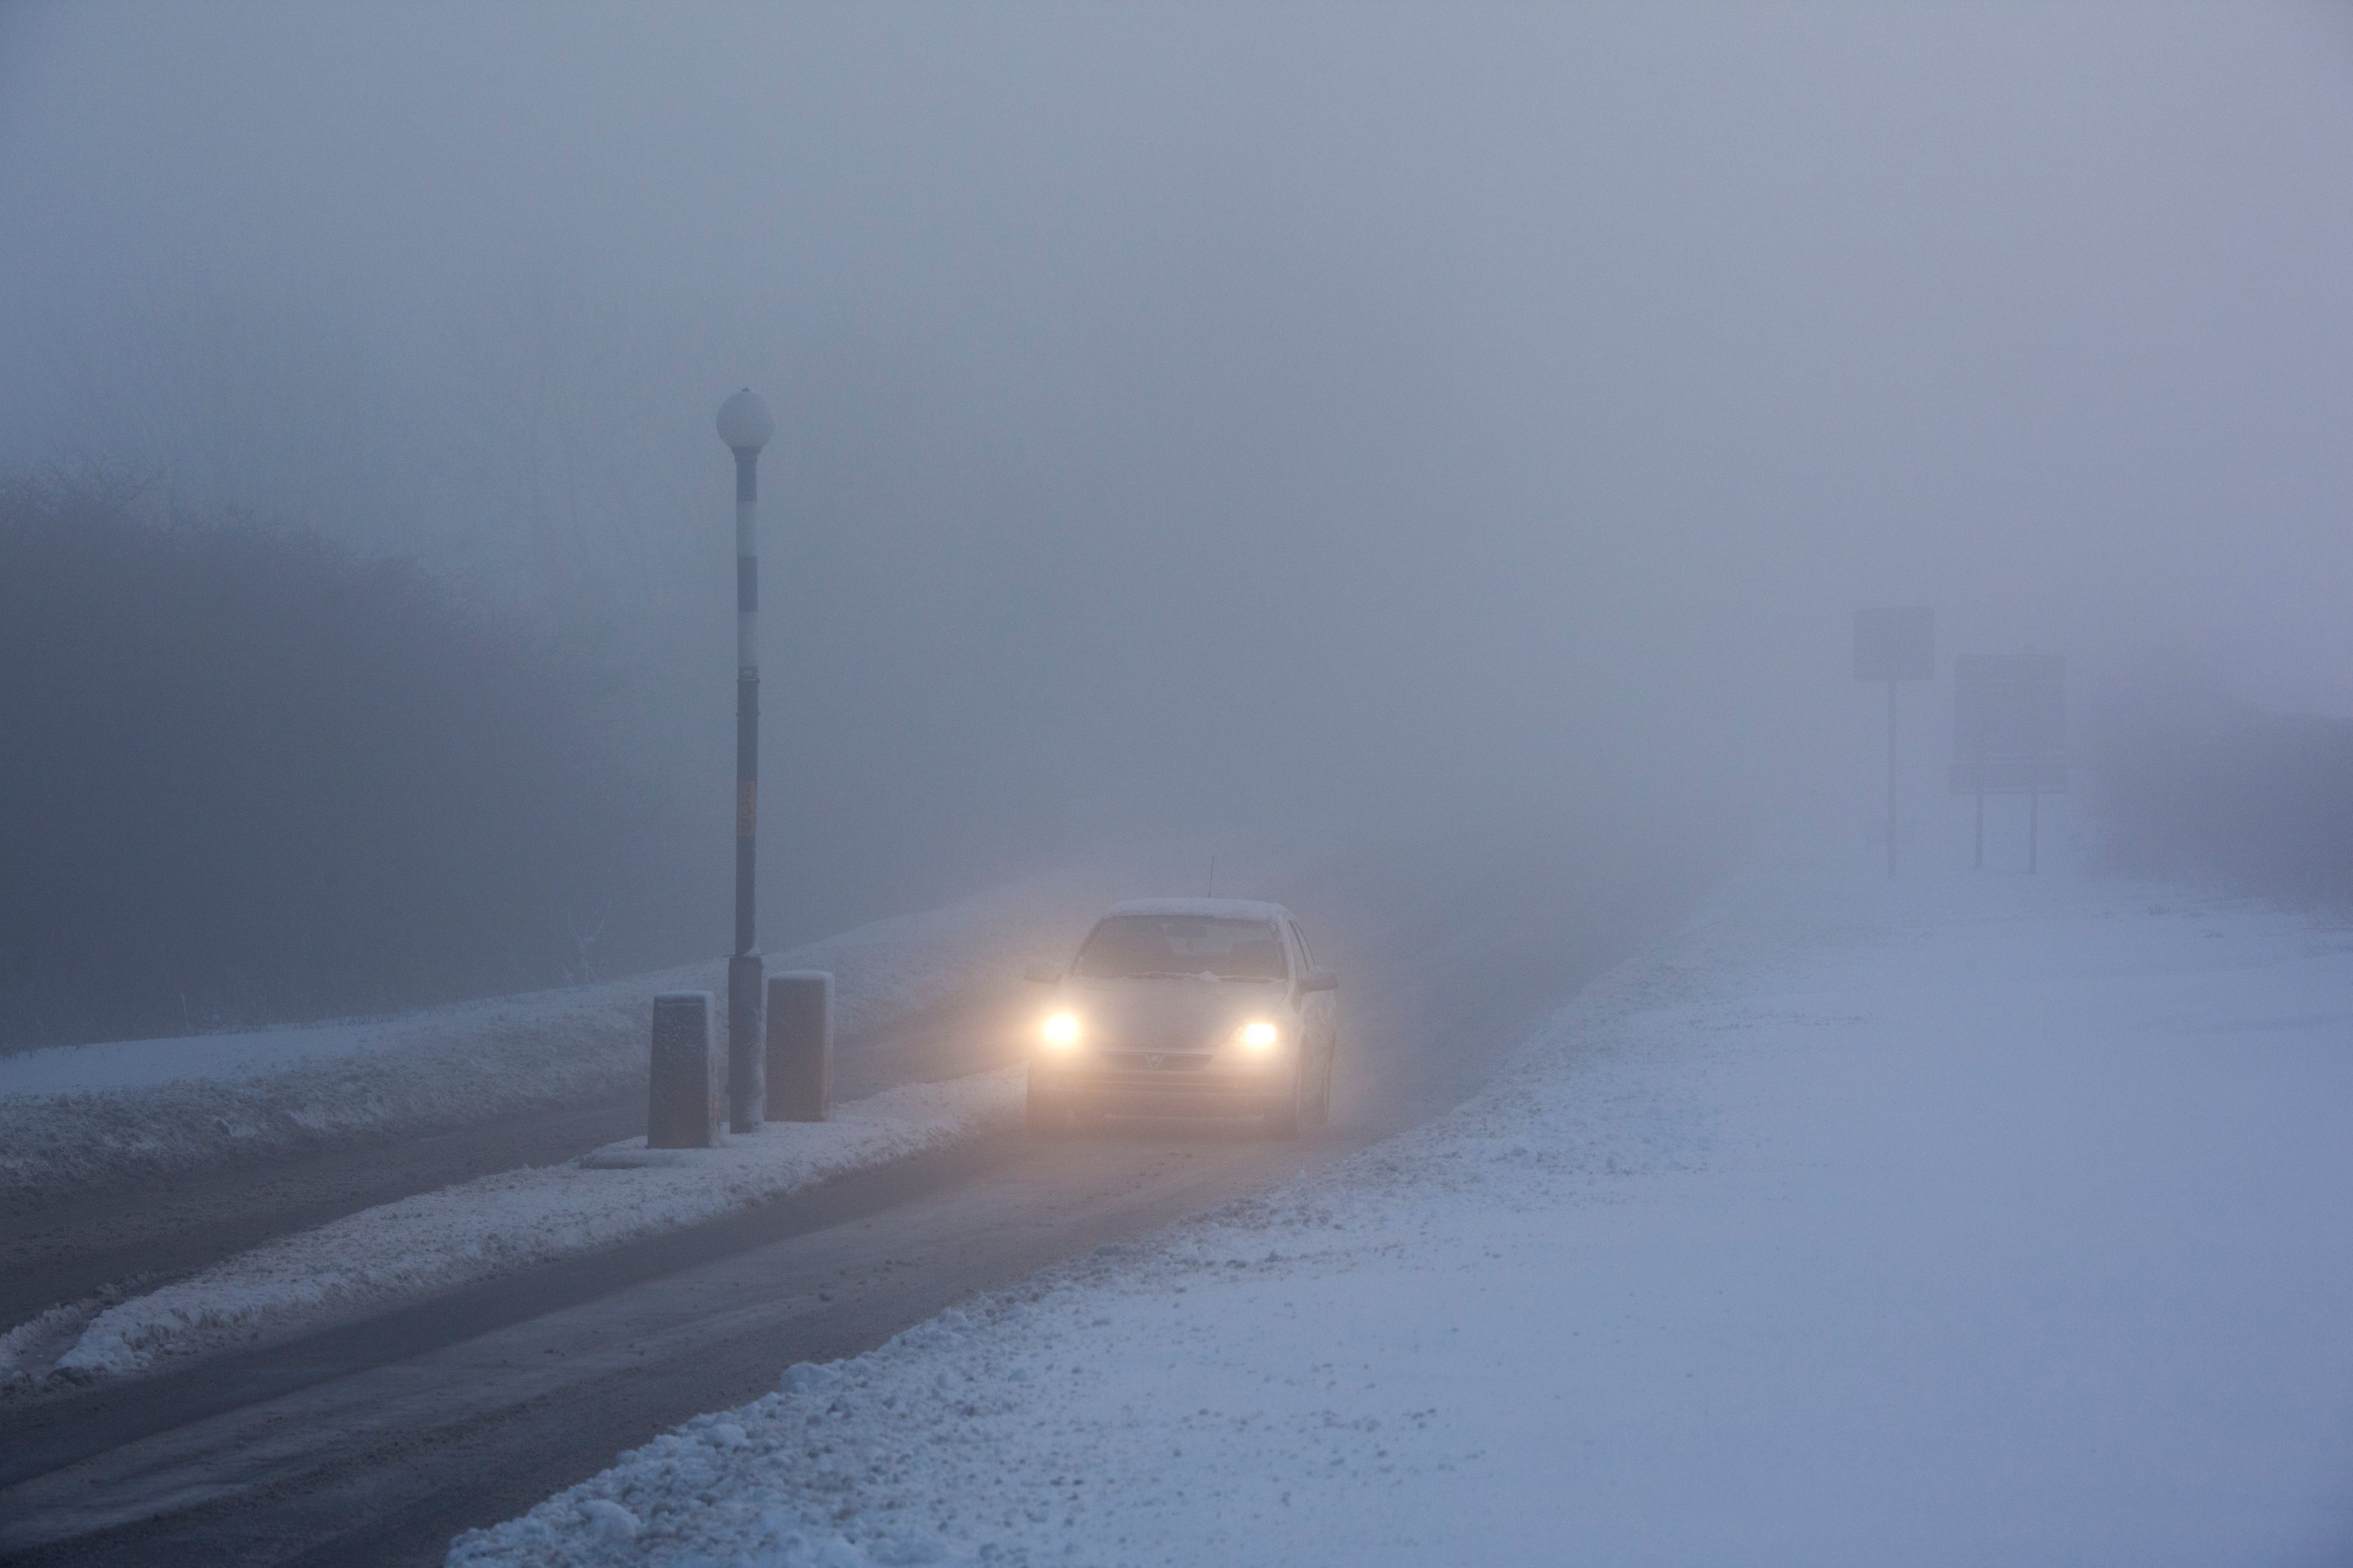 The Met Office has warned to travel disruption because of the fog